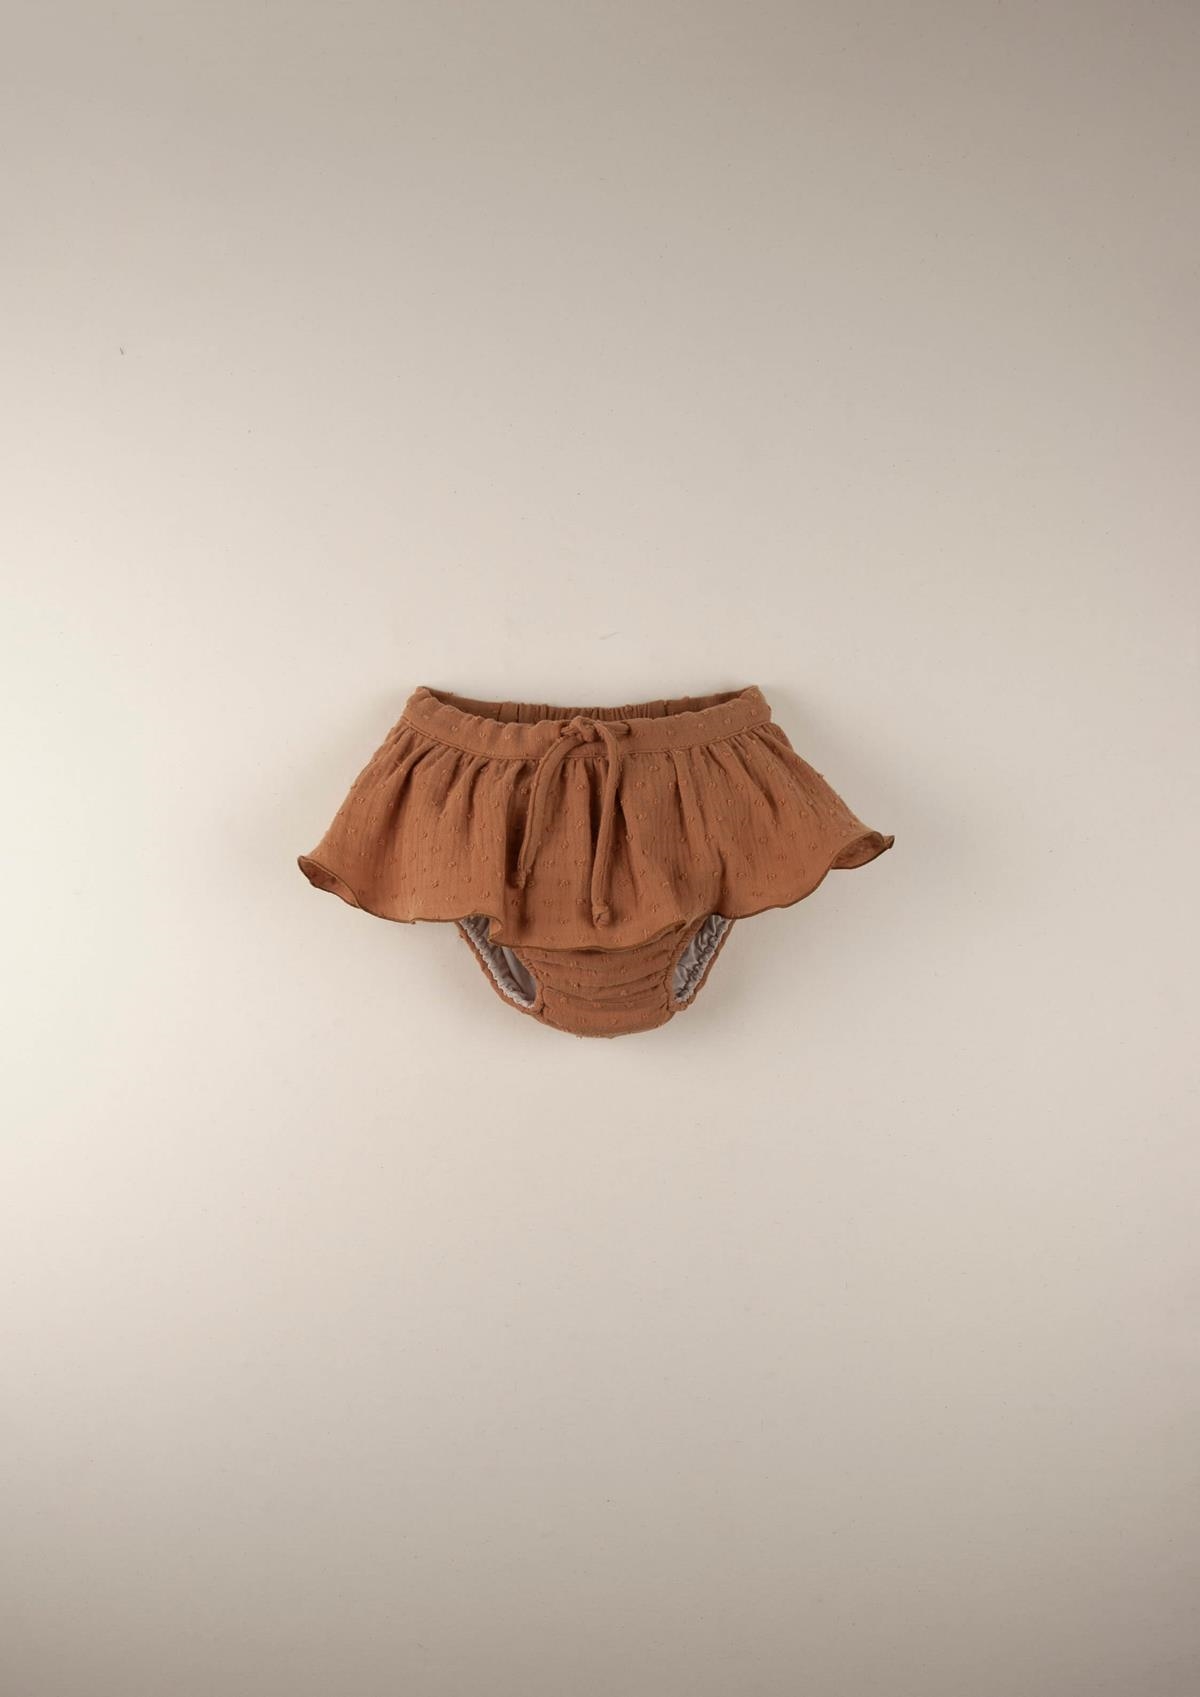 Mod.11.3 Terracotta organic culotte with frill | SS22 Mod.11.3 Terracotta organic culotte with frill | 1